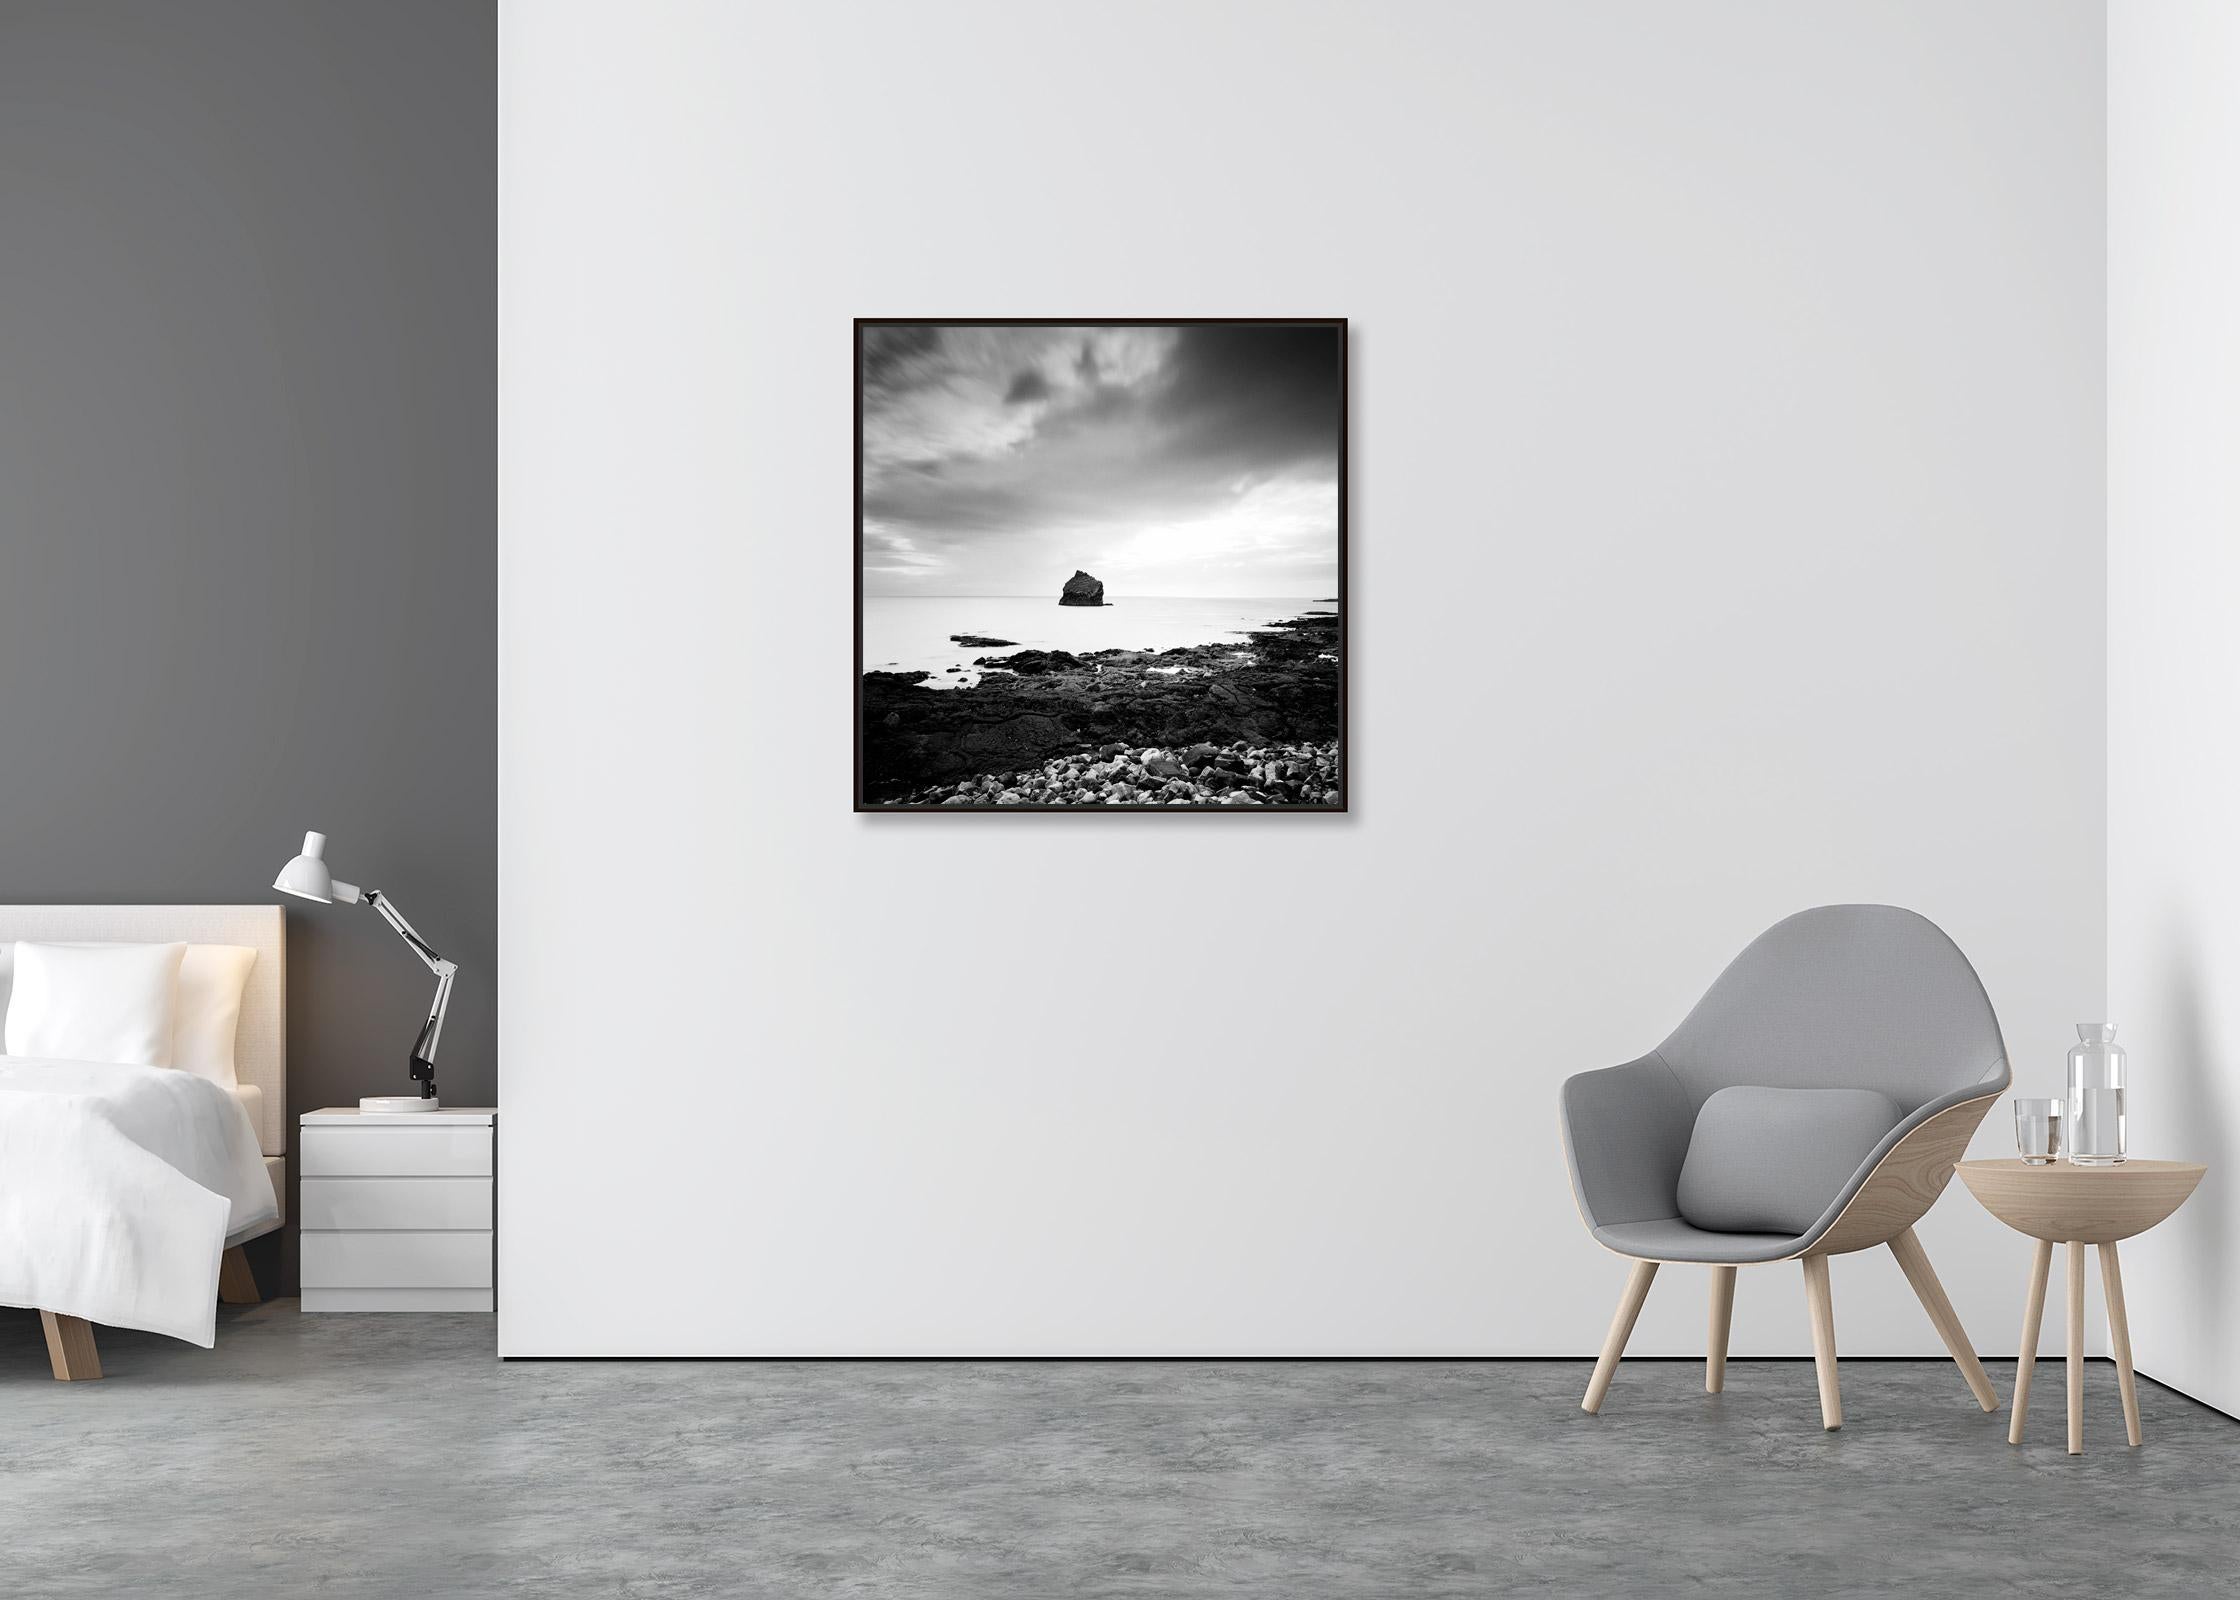 Reykjanes, Black Lava Beach, Iceland, Black and White landscape art photography - Contemporary Photograph by Gerald Berghammer